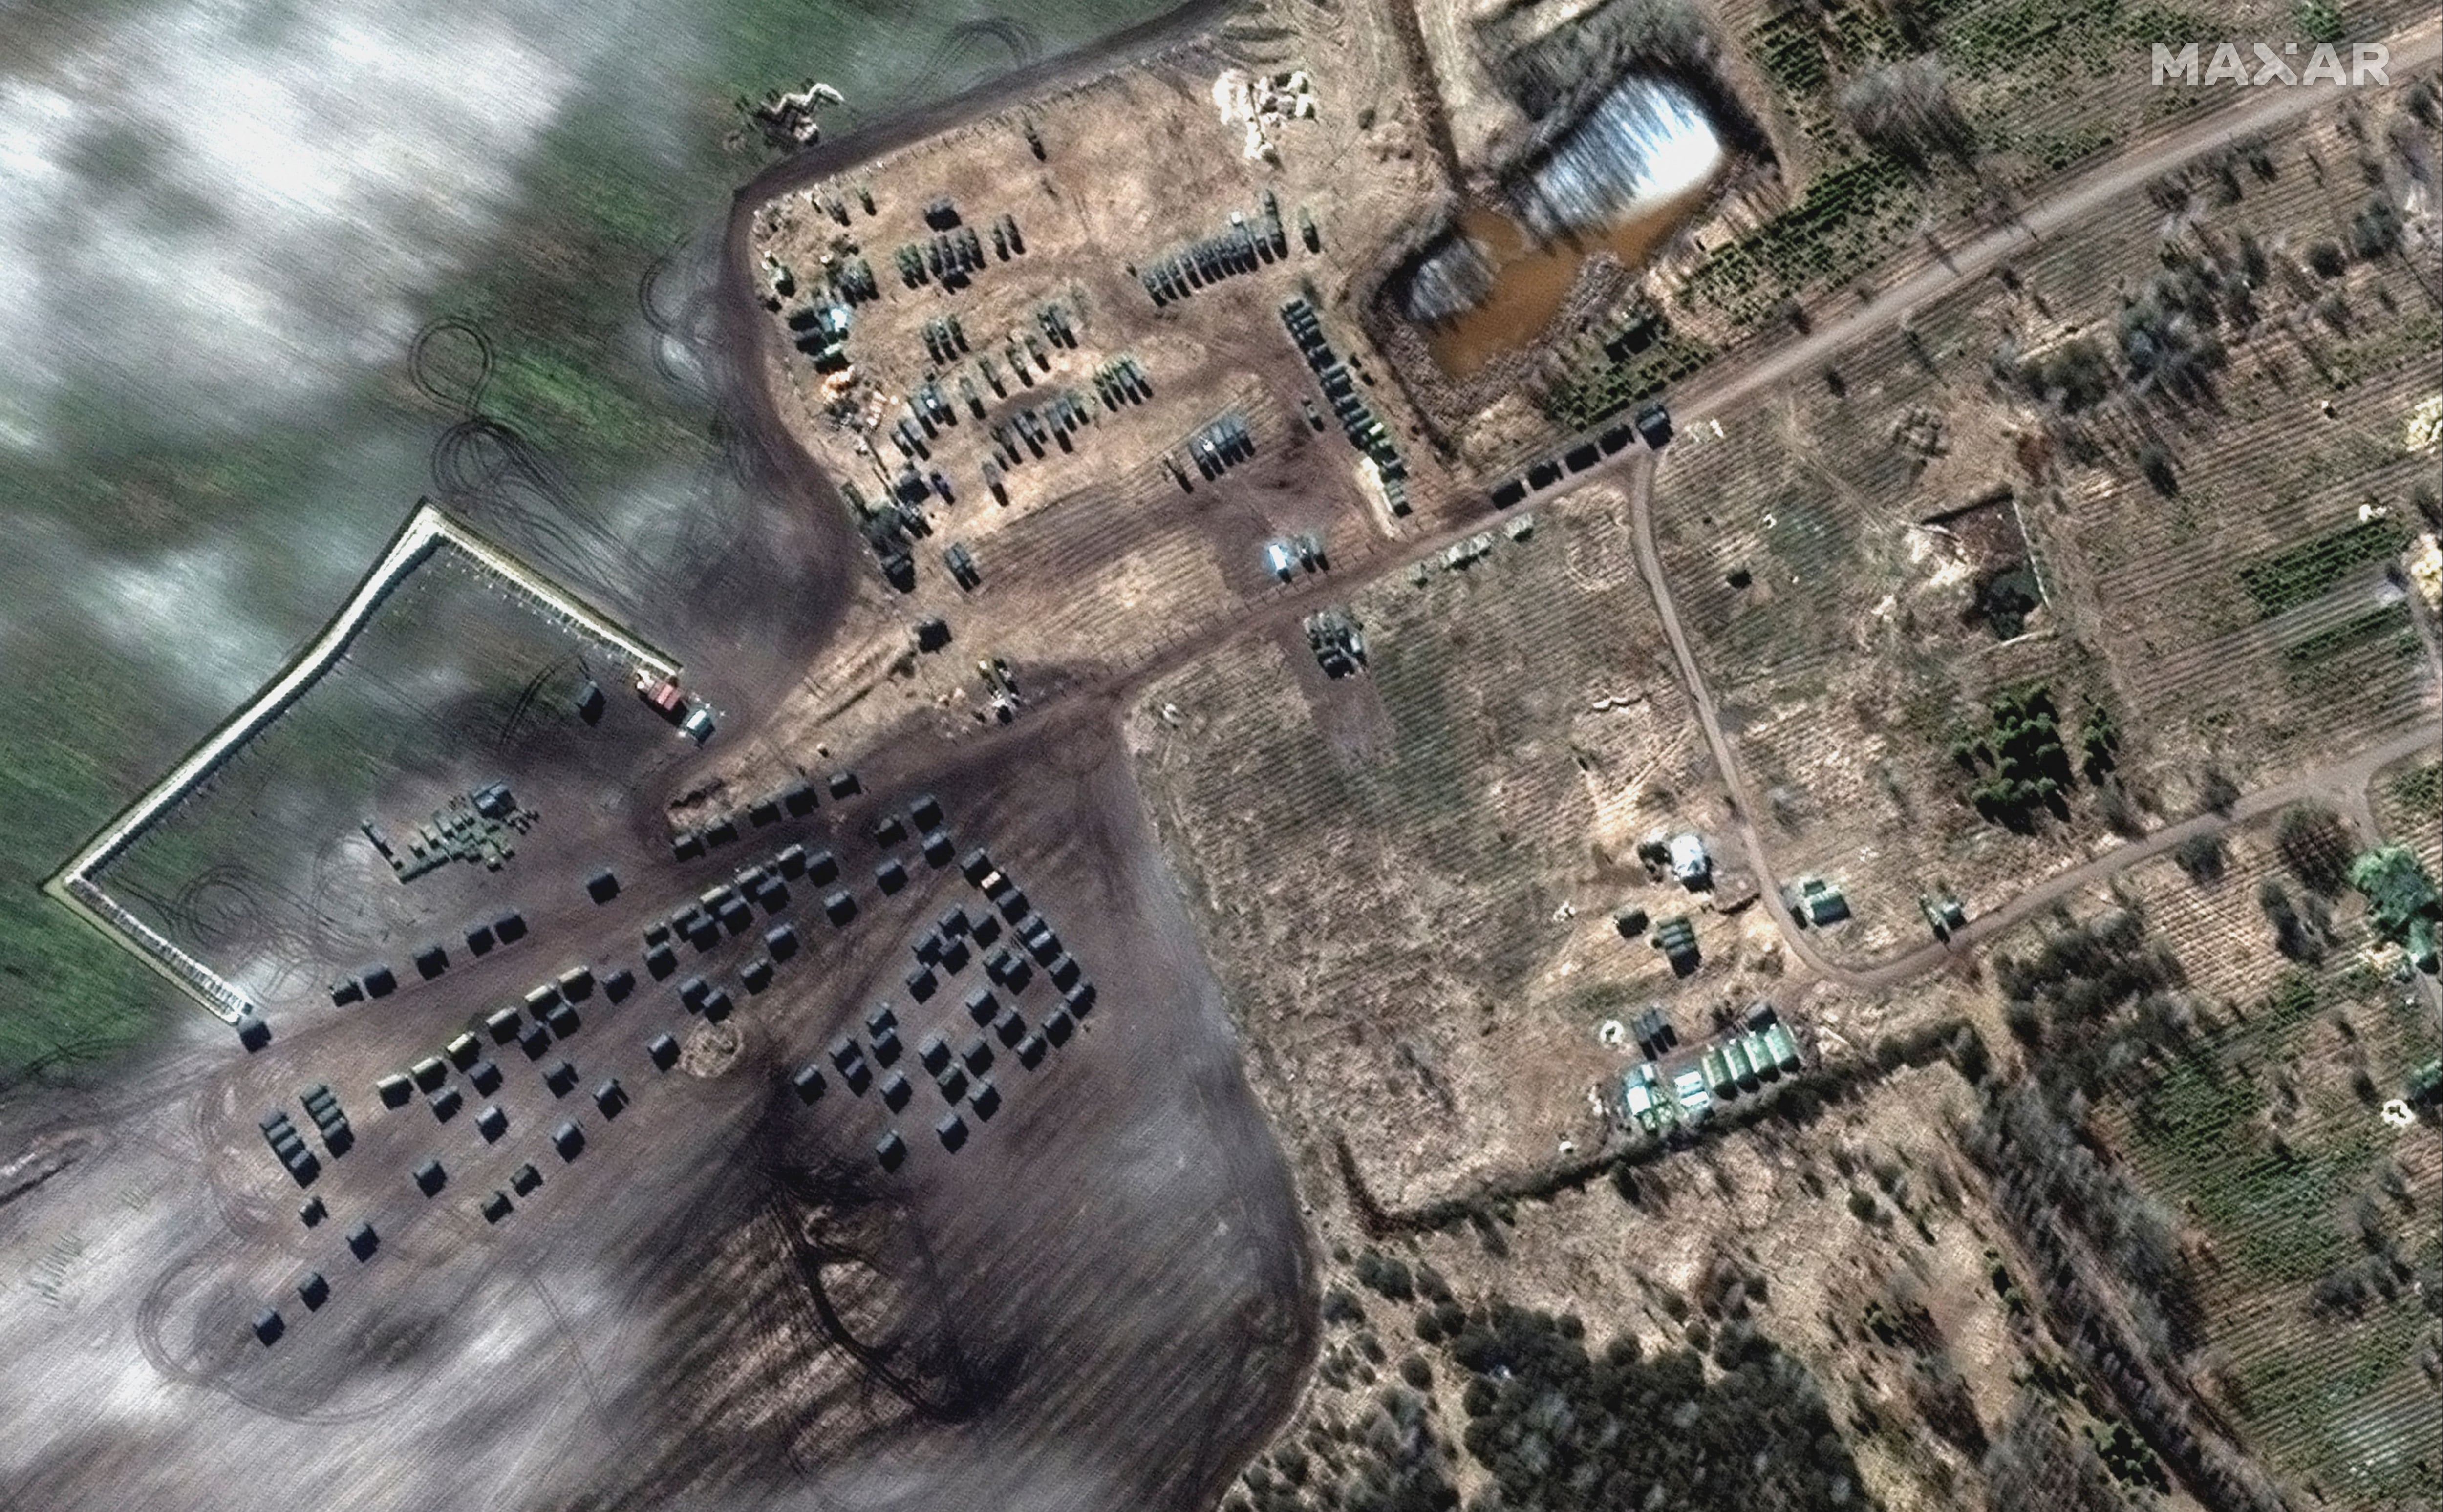 This satellite image shows ground forces in Khilchikha, Belarus, days after the Russian invasion of Ukraine.  Maxar Technologies/Handout via REUTERS